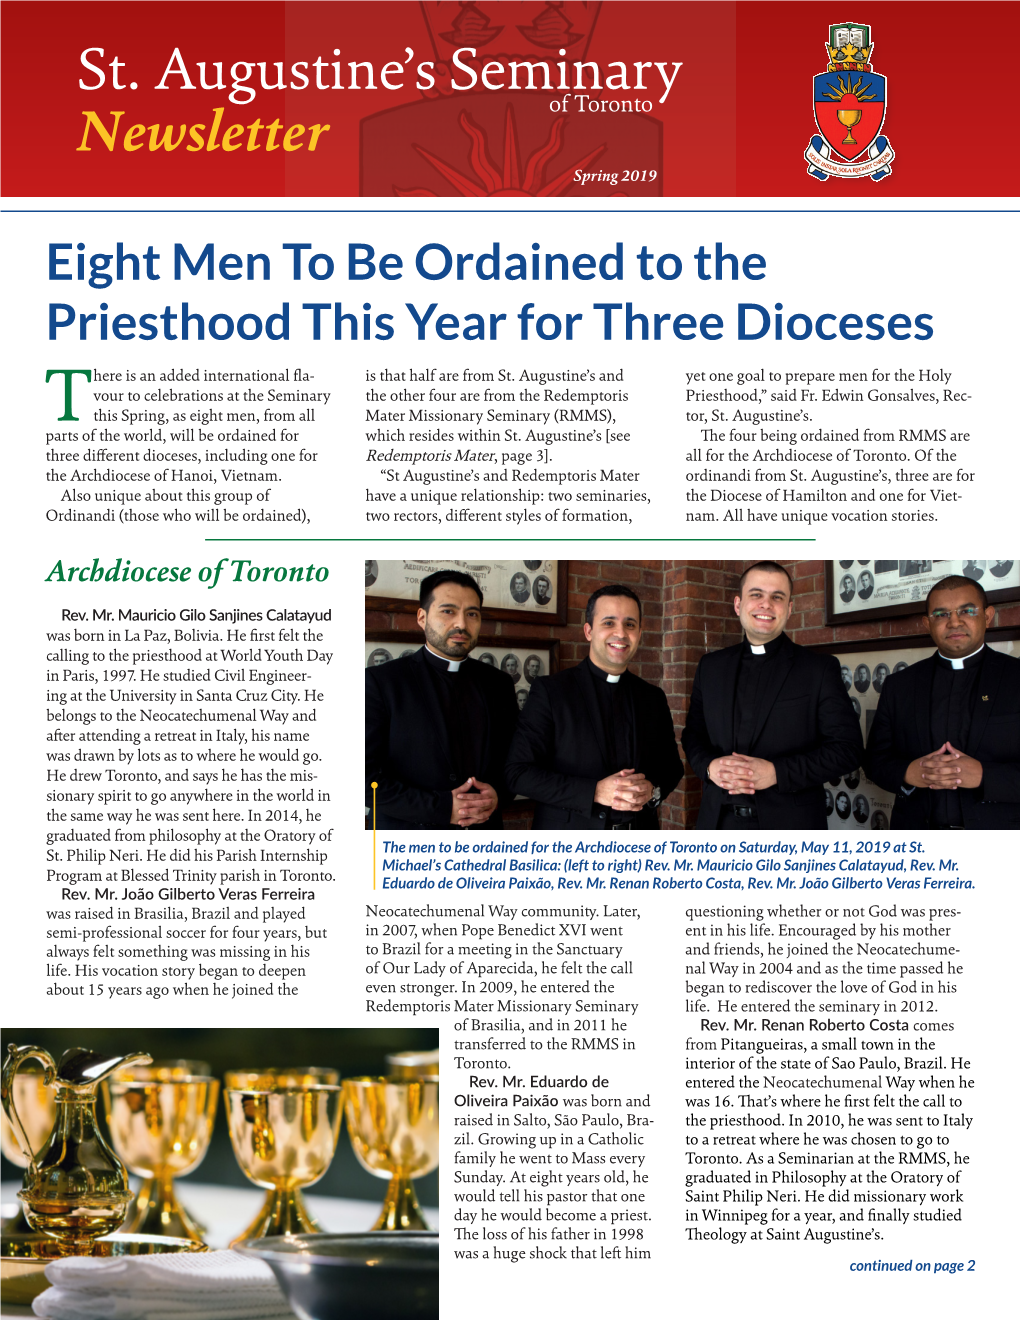 Eight Men to Be Ordained to the Priesthood This Year for Three Dioceses